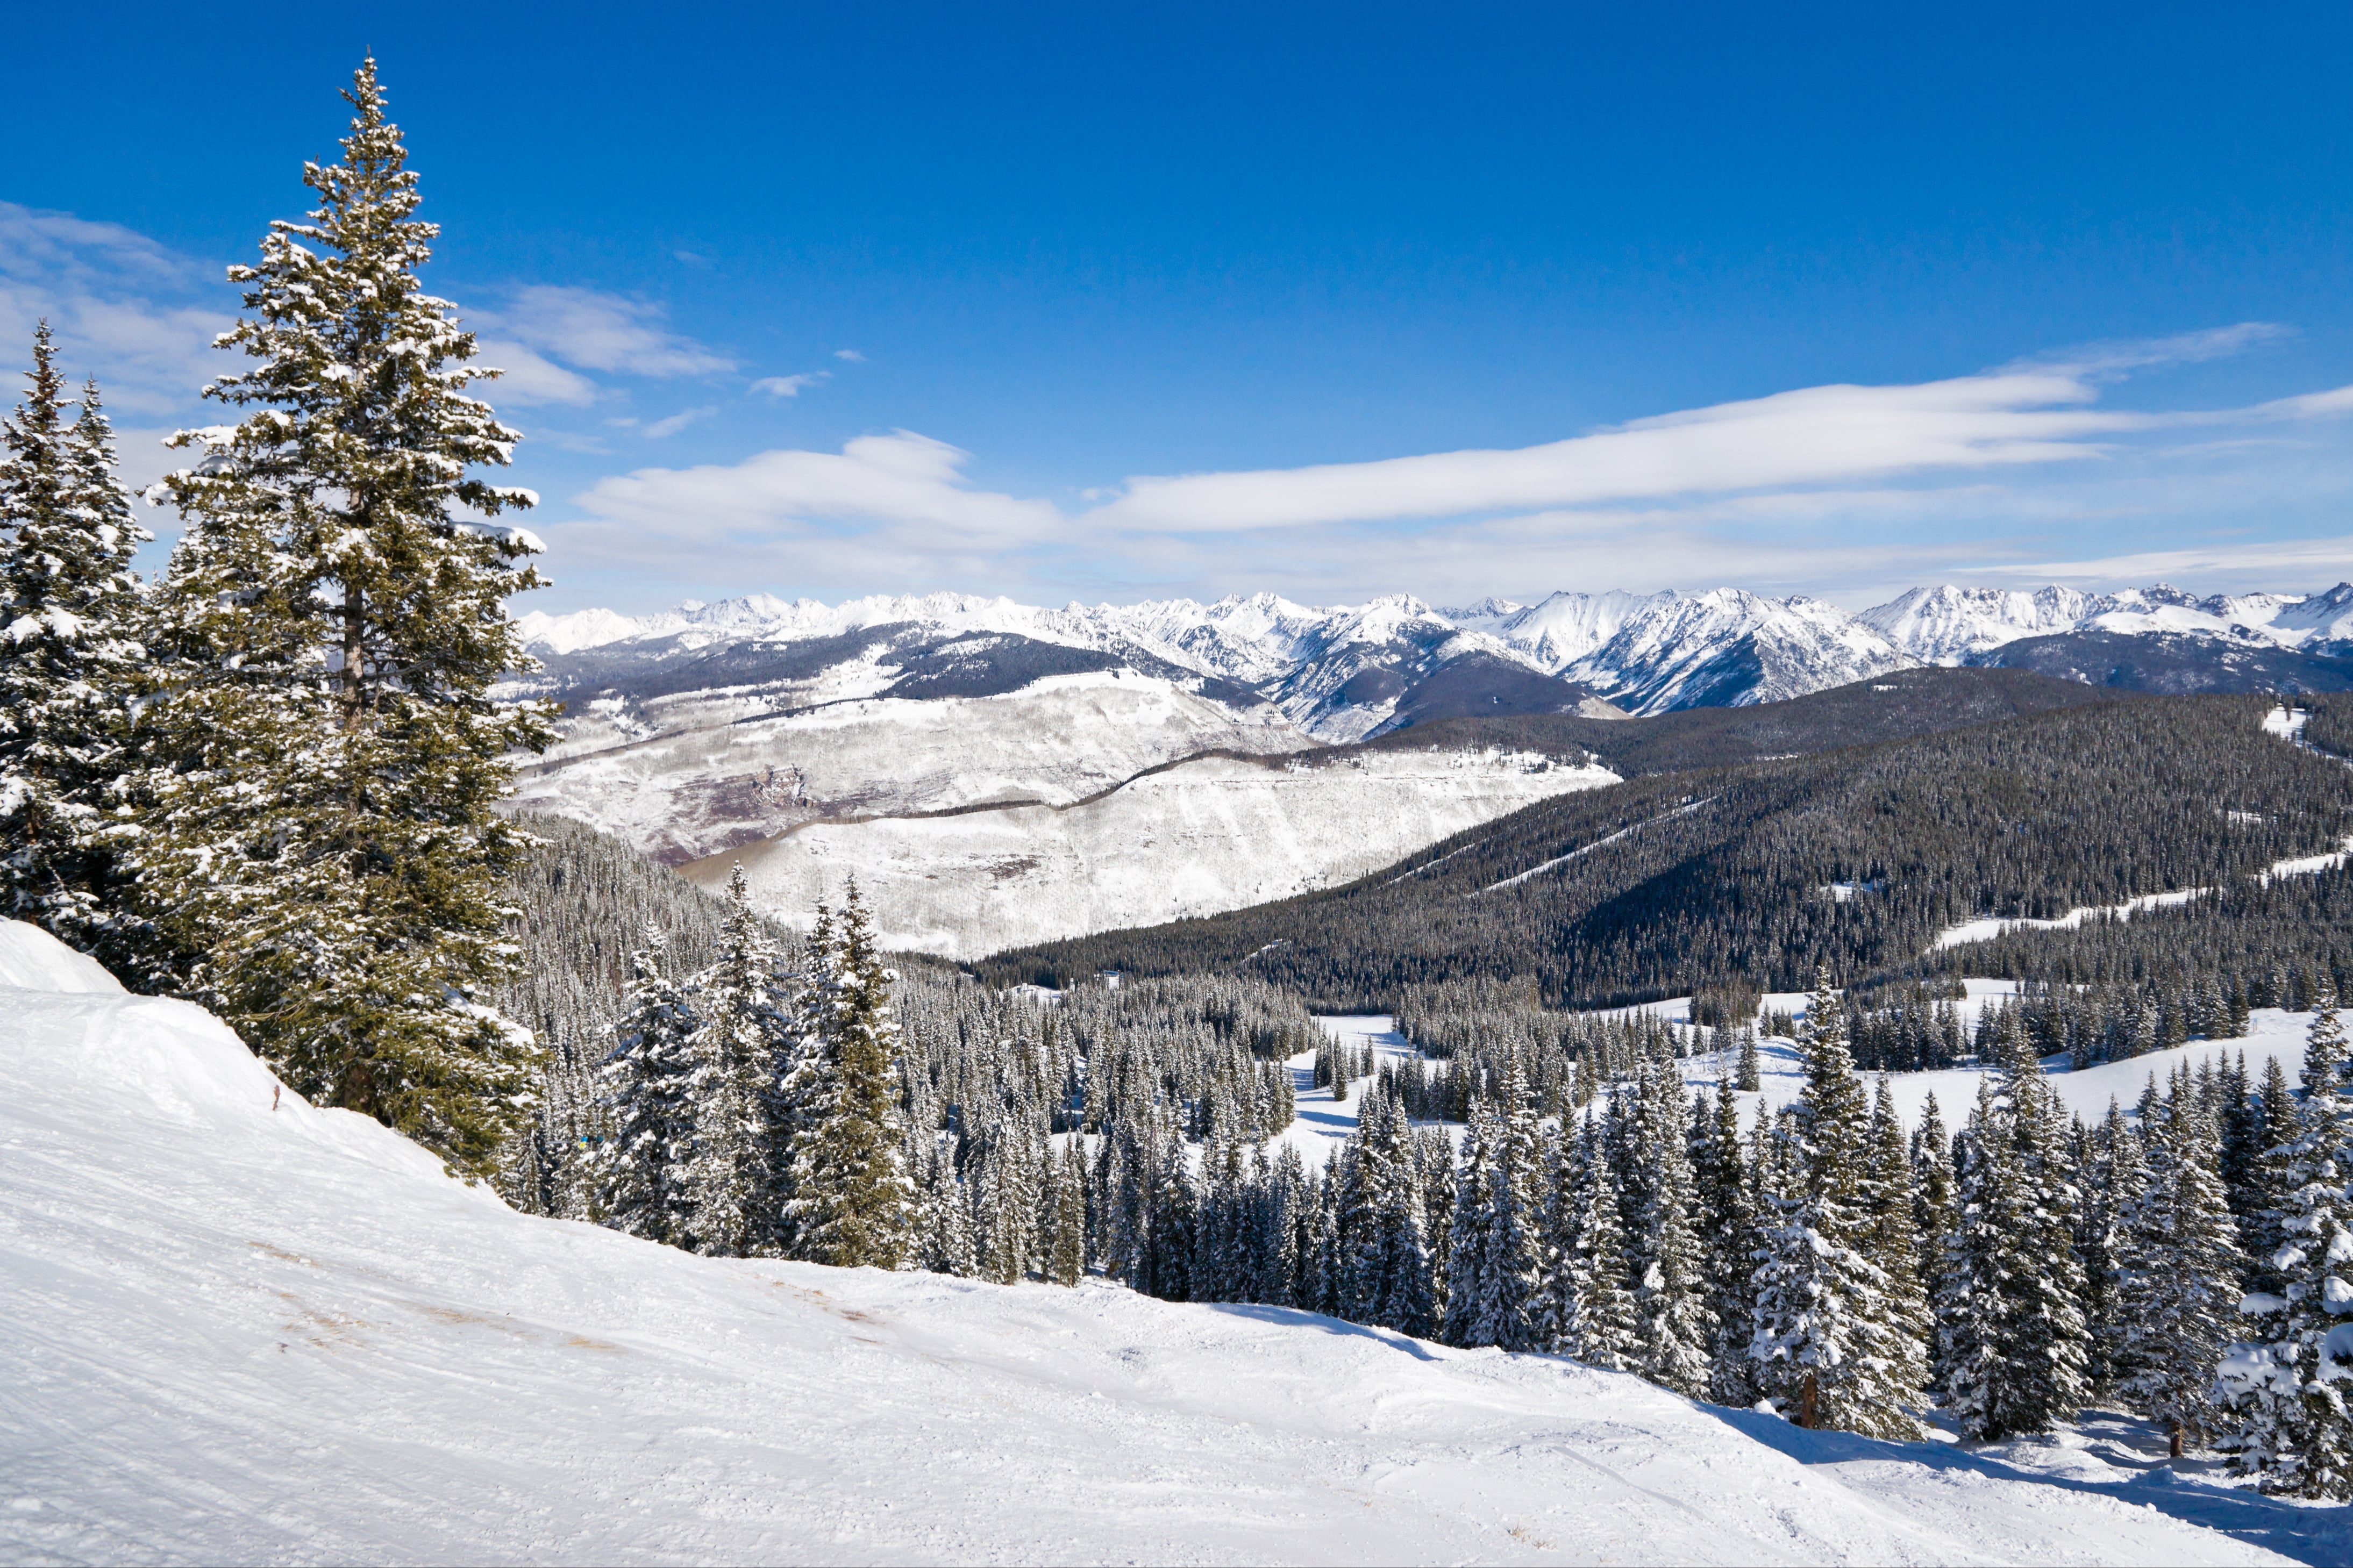 A view of ski slopes in Colorado. A resort in Aspen had sued a UK designer for sending influencers to its slopes